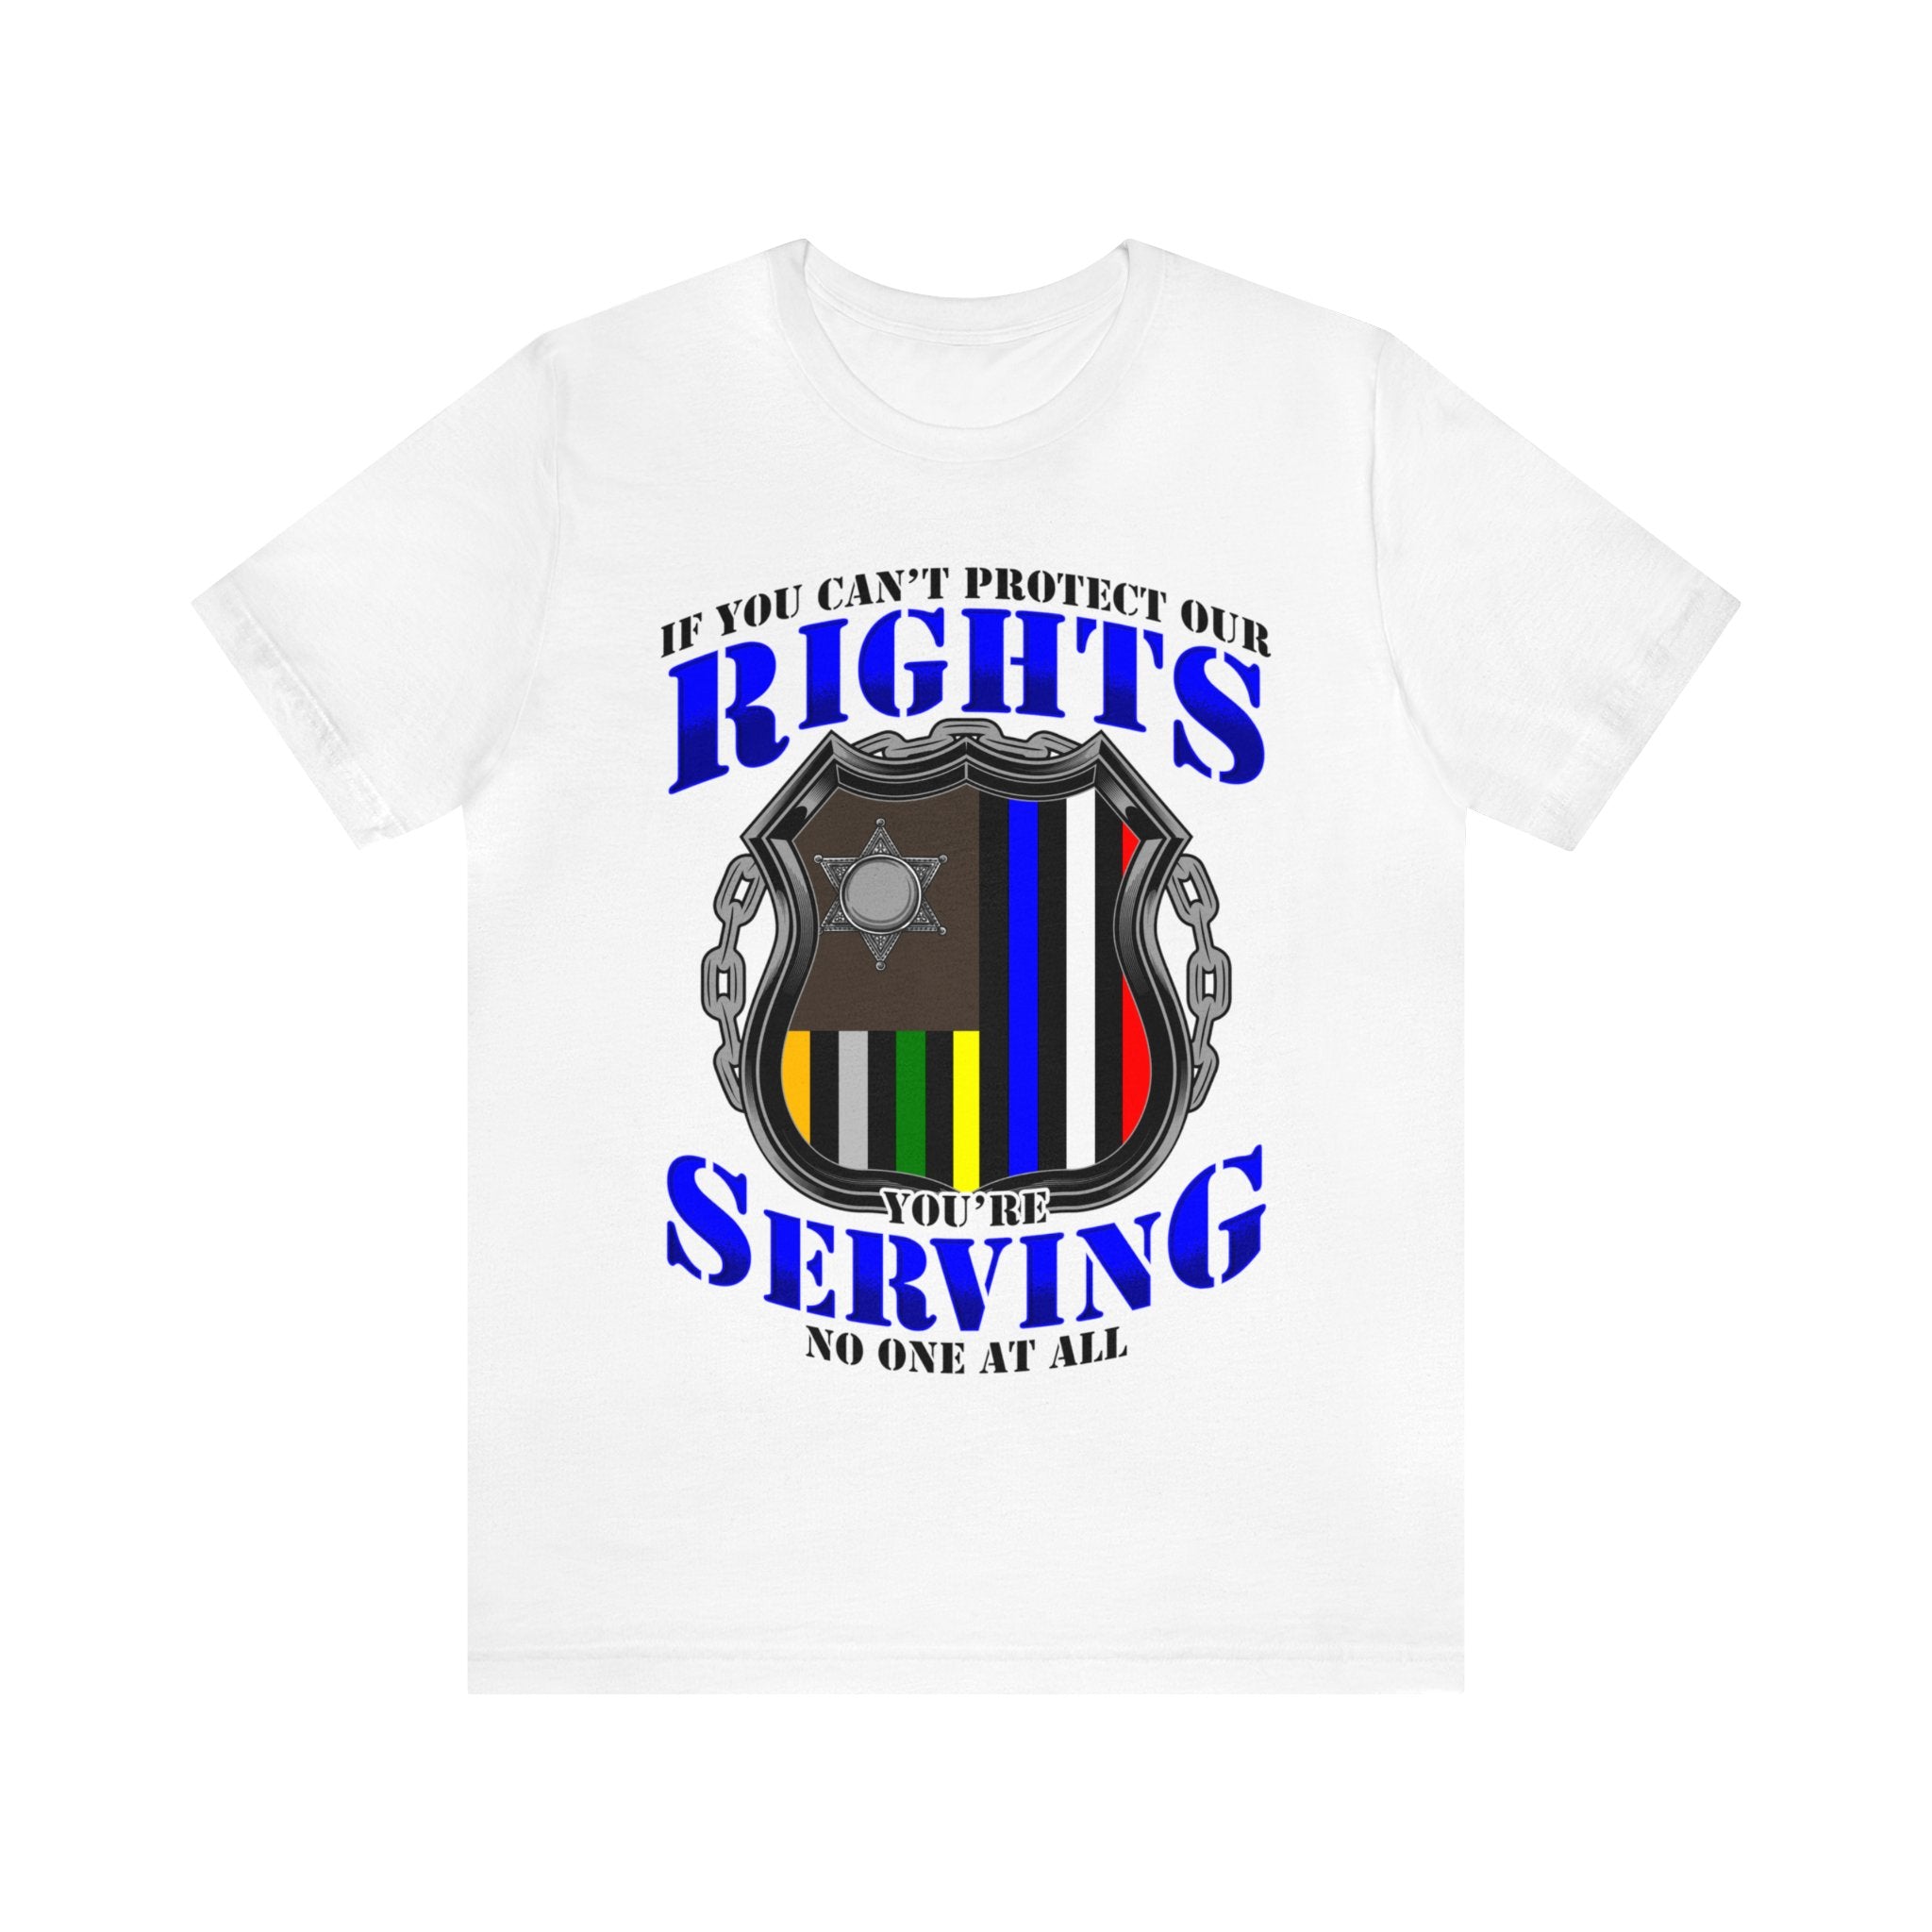 Thin Police Line Tee - Rights/Serving